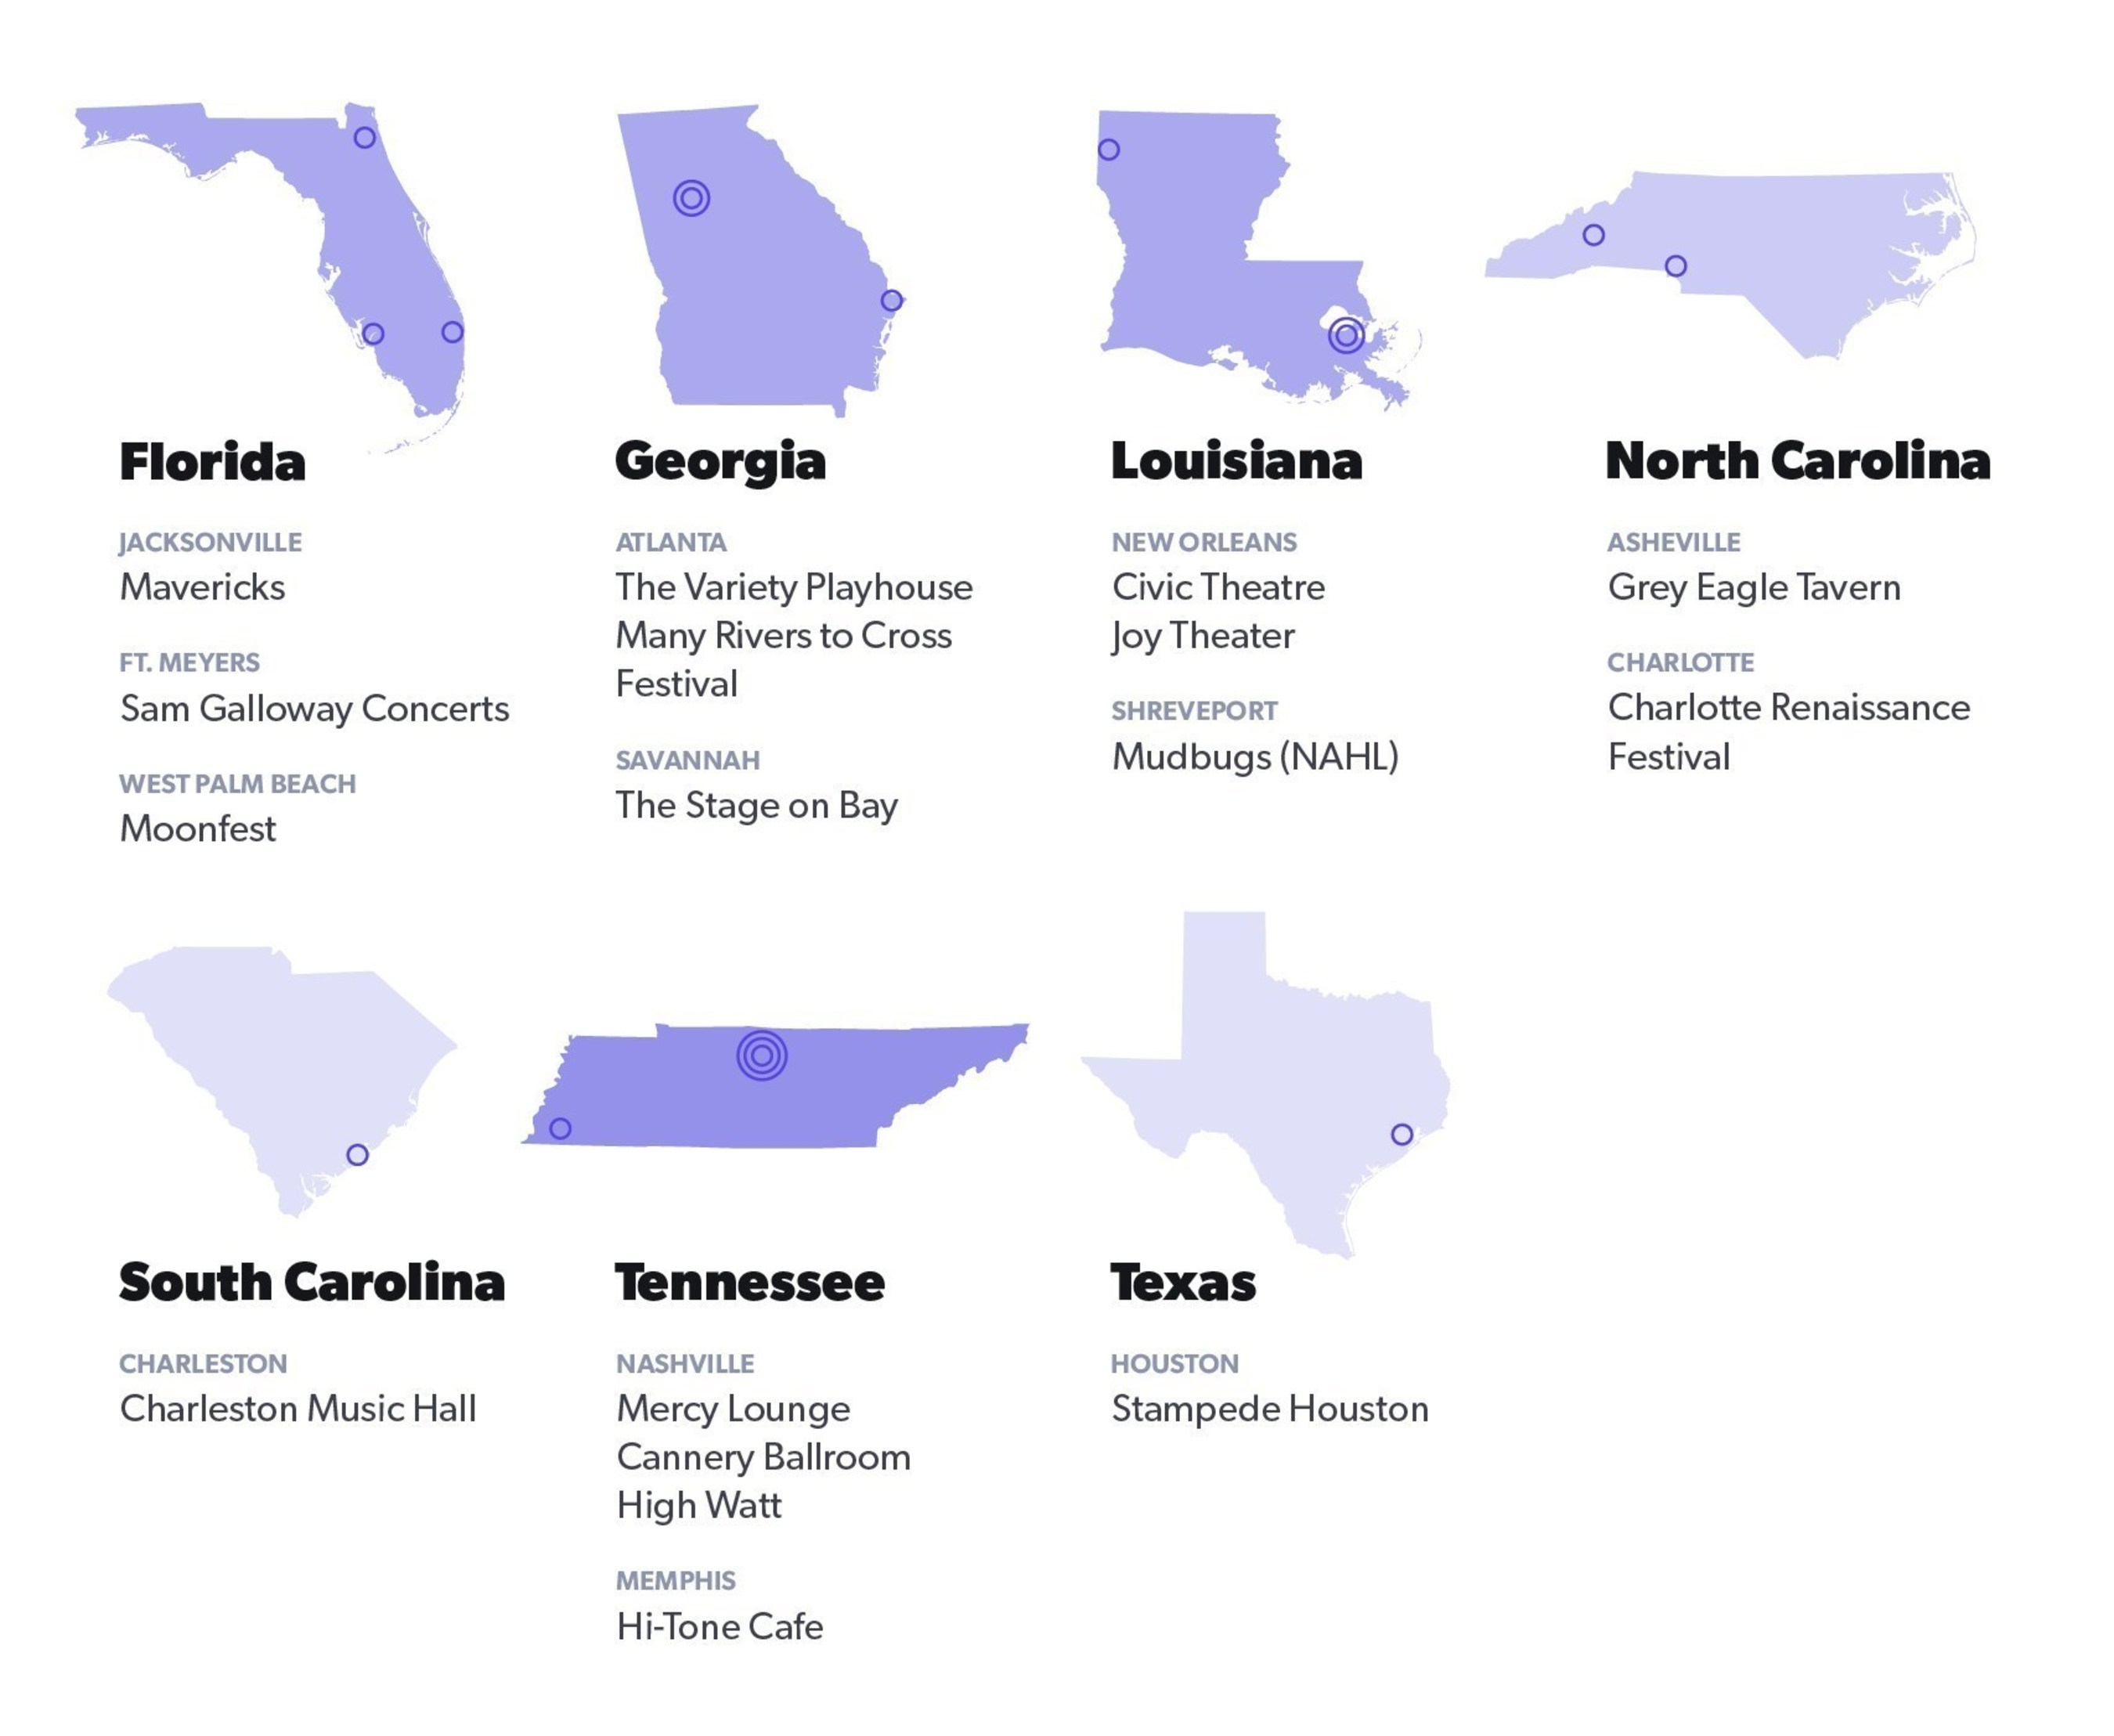 Ticketfly Signs 17 Venues and Promoters Across Seven States in the Southern U.S., Cementing a Leadership Position in the Region.  Shows major momentum for the Pandora-Ticketfly live events marketing platform